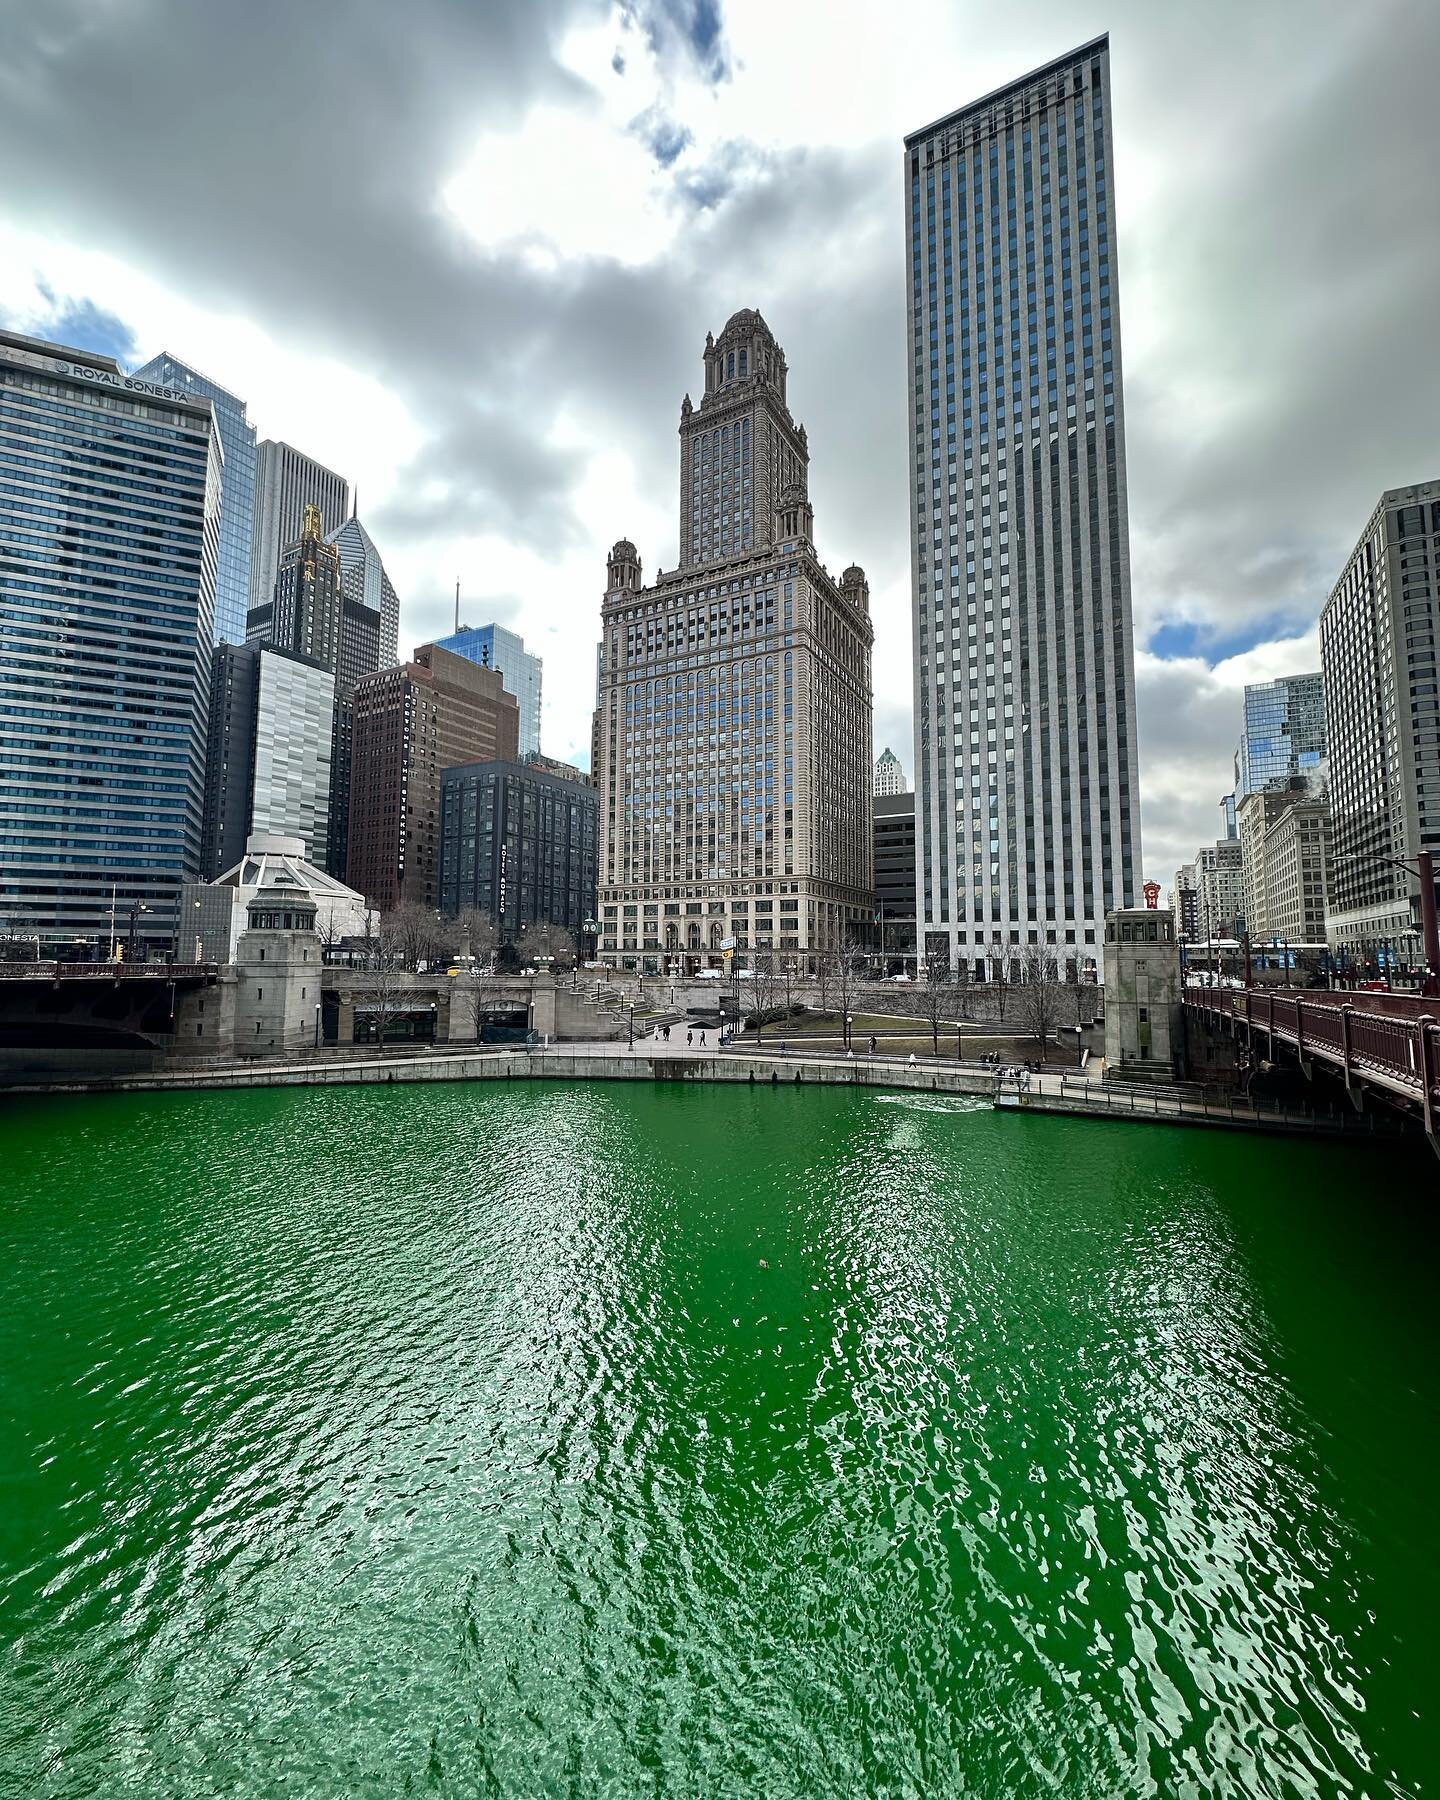 The Chicago River flowing green for St. Patrick&rsquo;s day.
#stpatricksday #chicago #chicagoriver